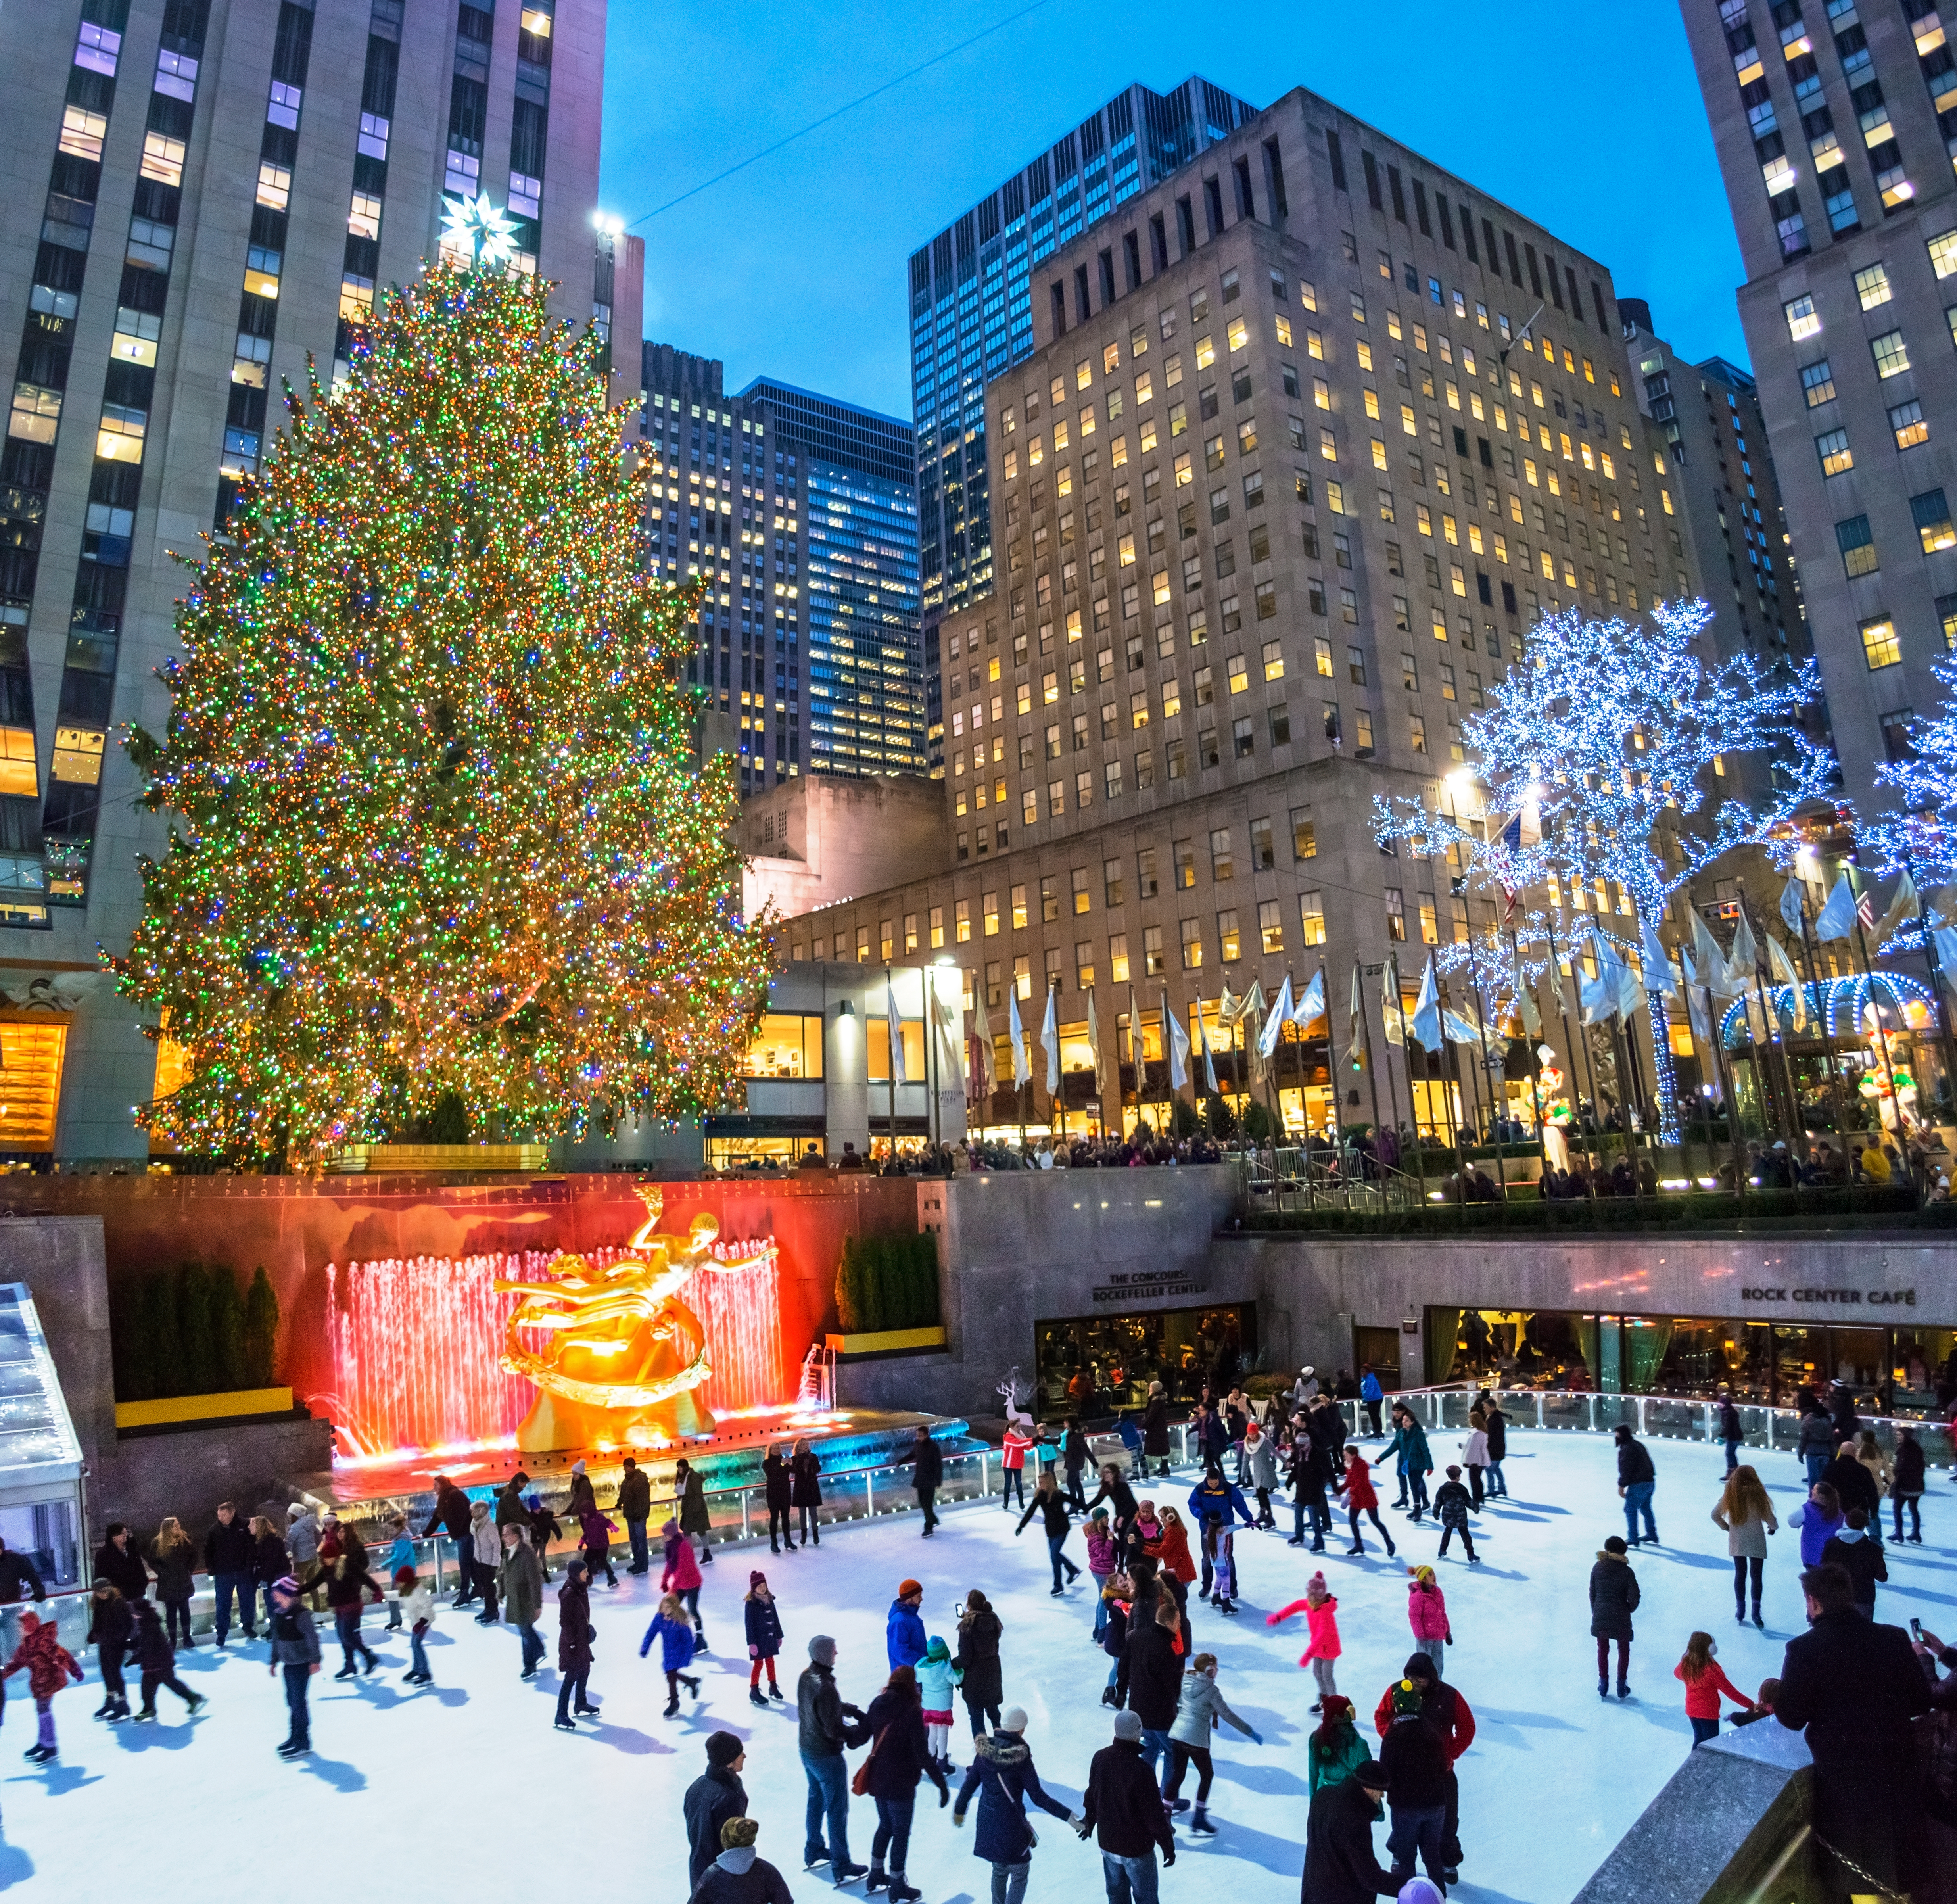 Feel the Christmas Spirit While on a Family Vacation in These Destinations - Rockefeller Center in New York City at Christmas